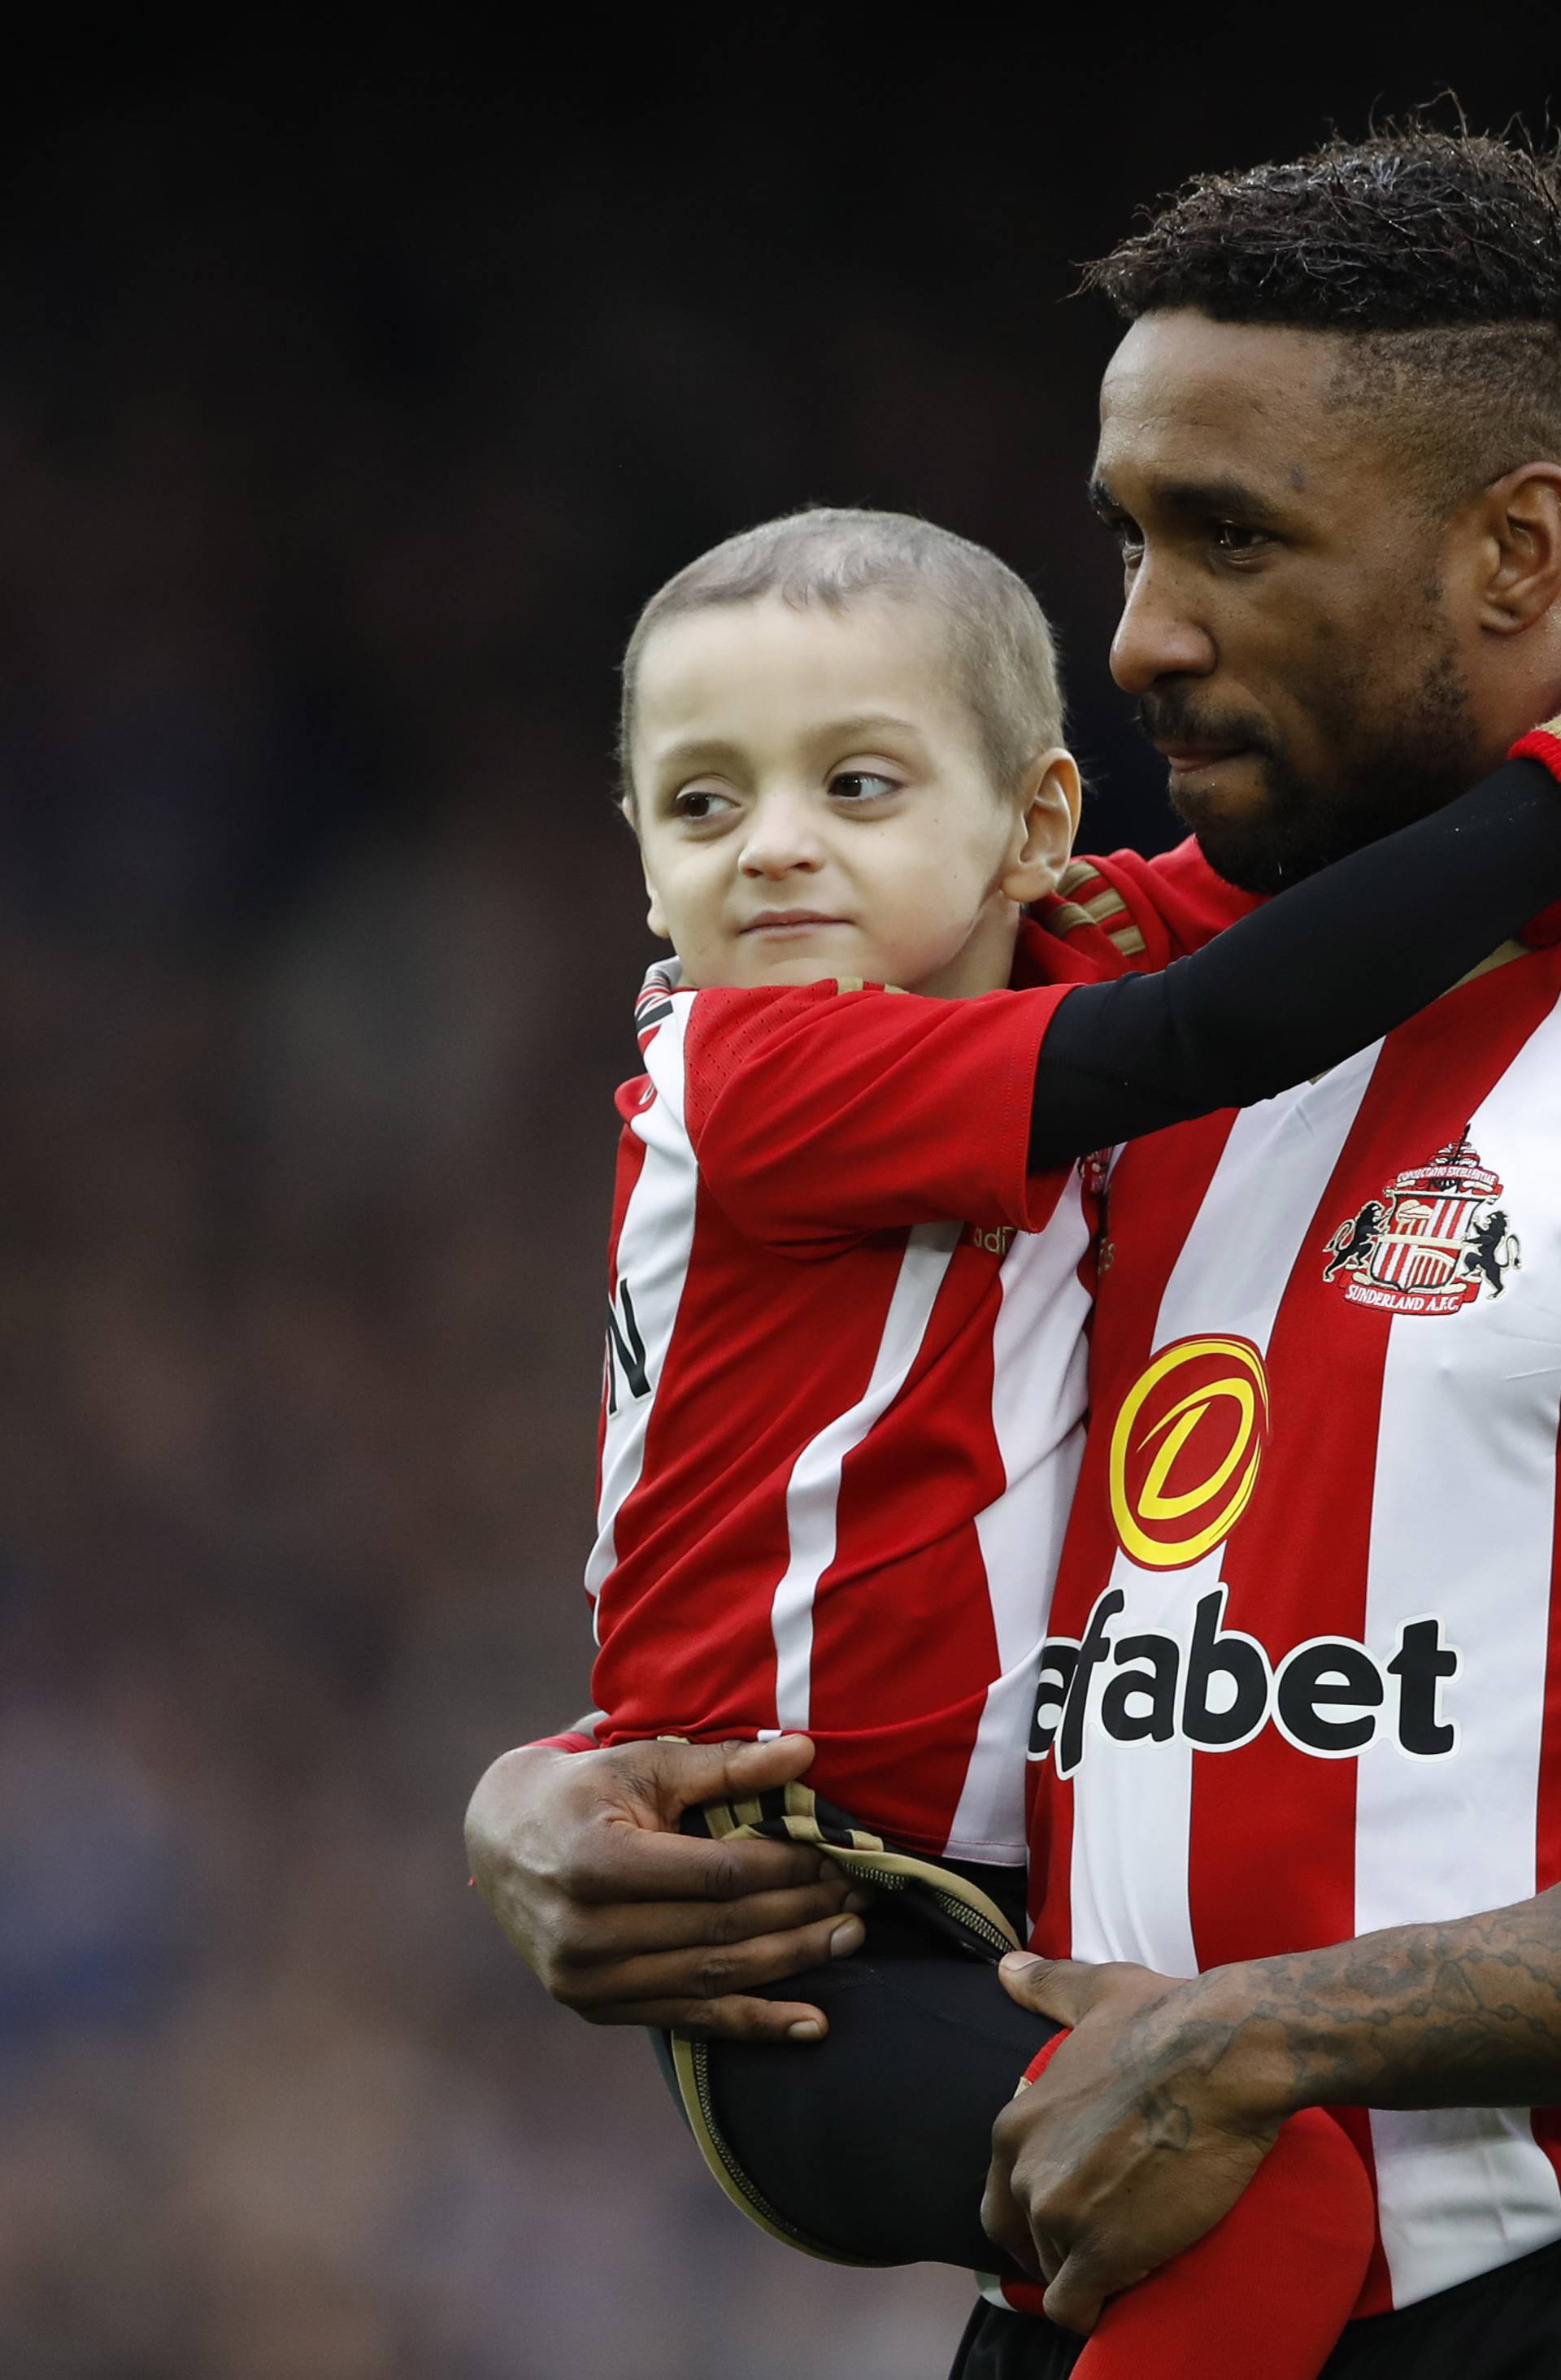 Sunderland's Jermain Defoe carries out young Sunderland fan Bradley Lowery before the match